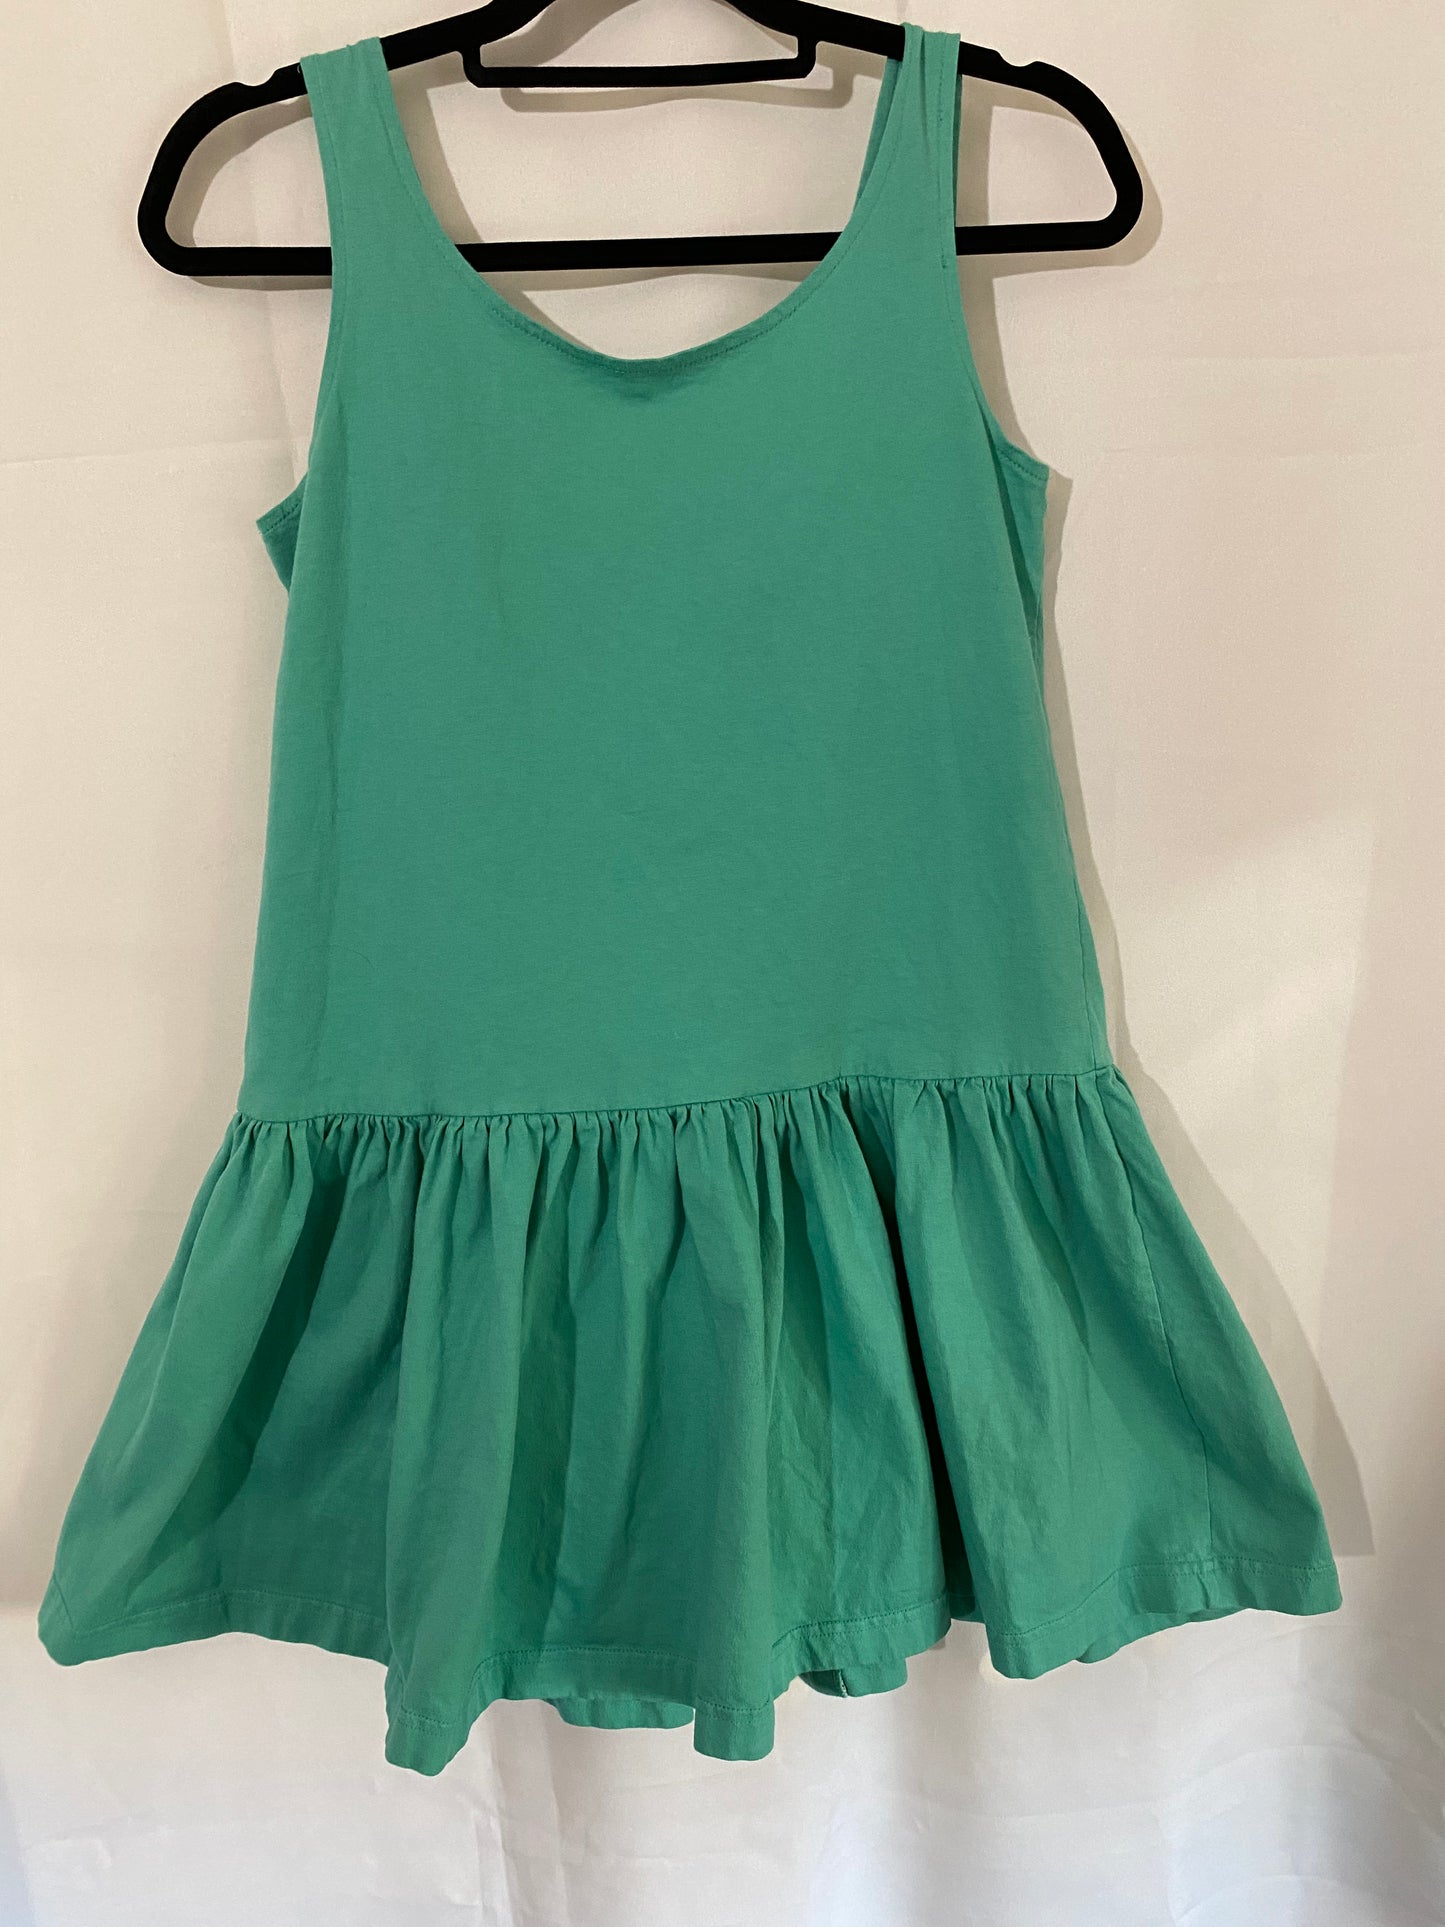 1990's Turquoise Dress with White Buttons